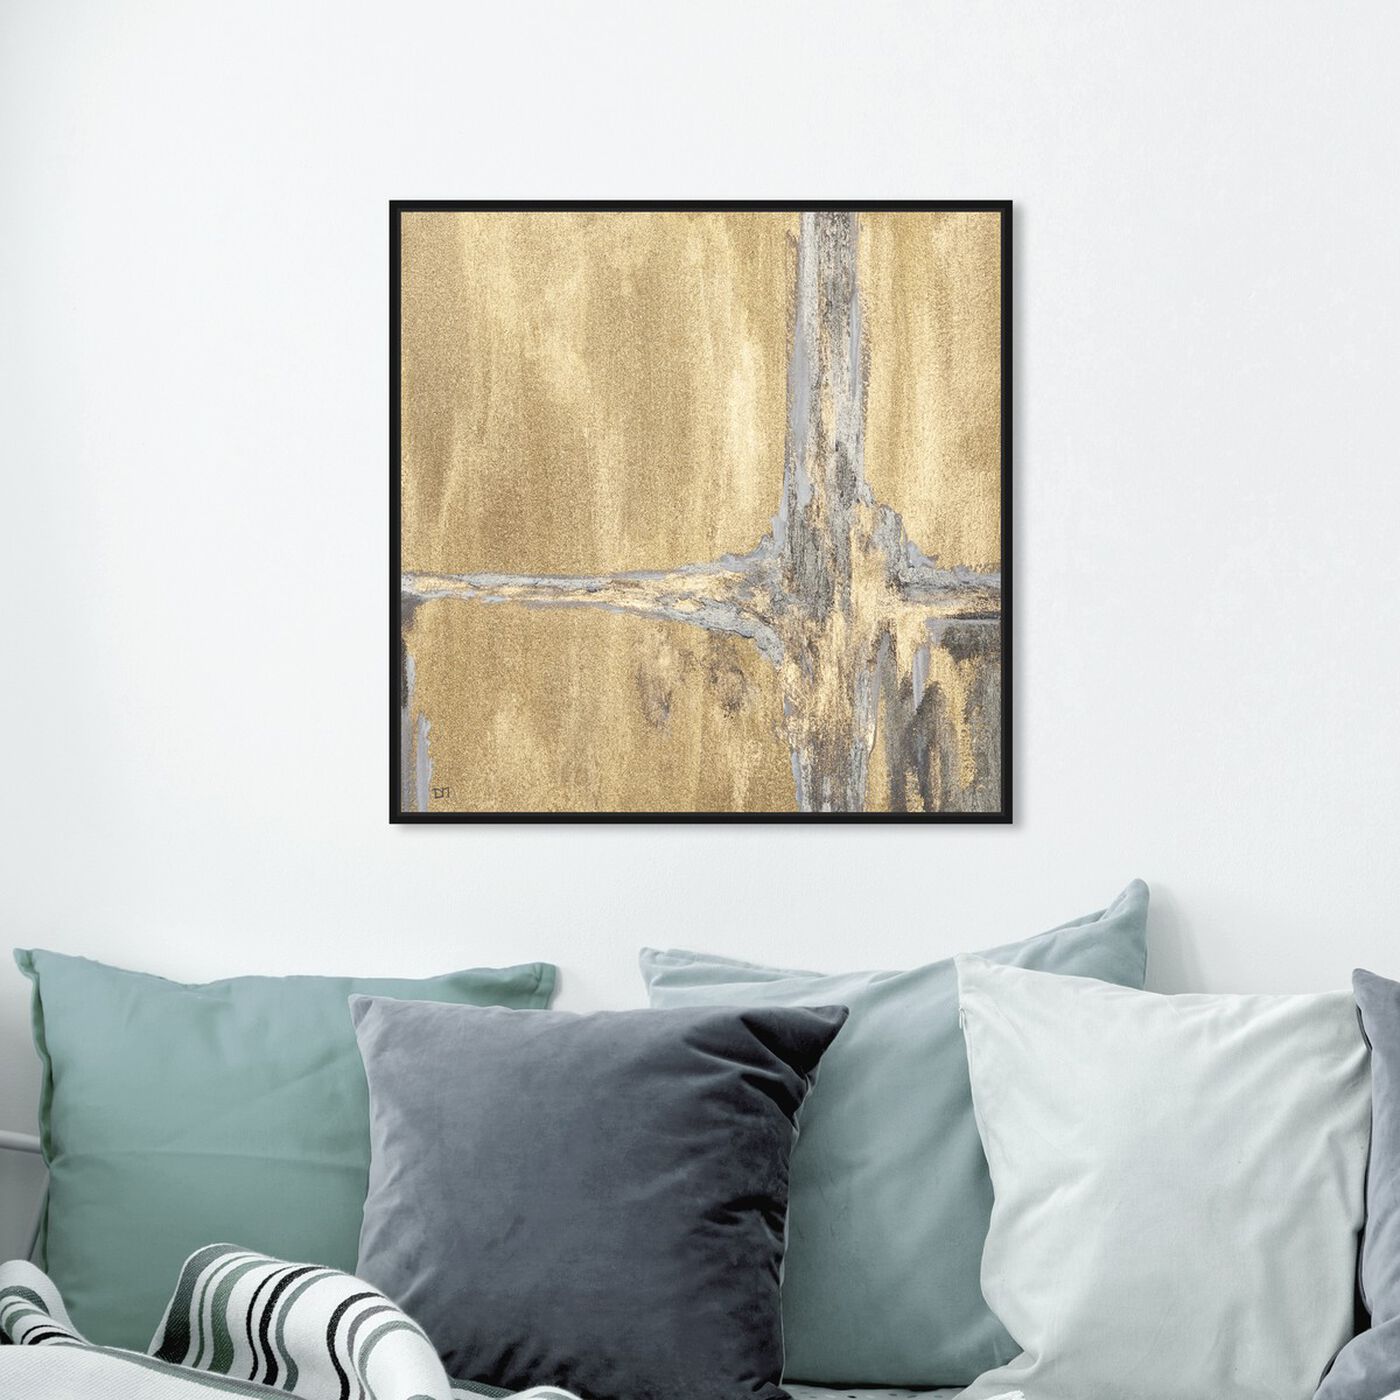 Hanging view of Golden Falls featuring abstract and textures art.